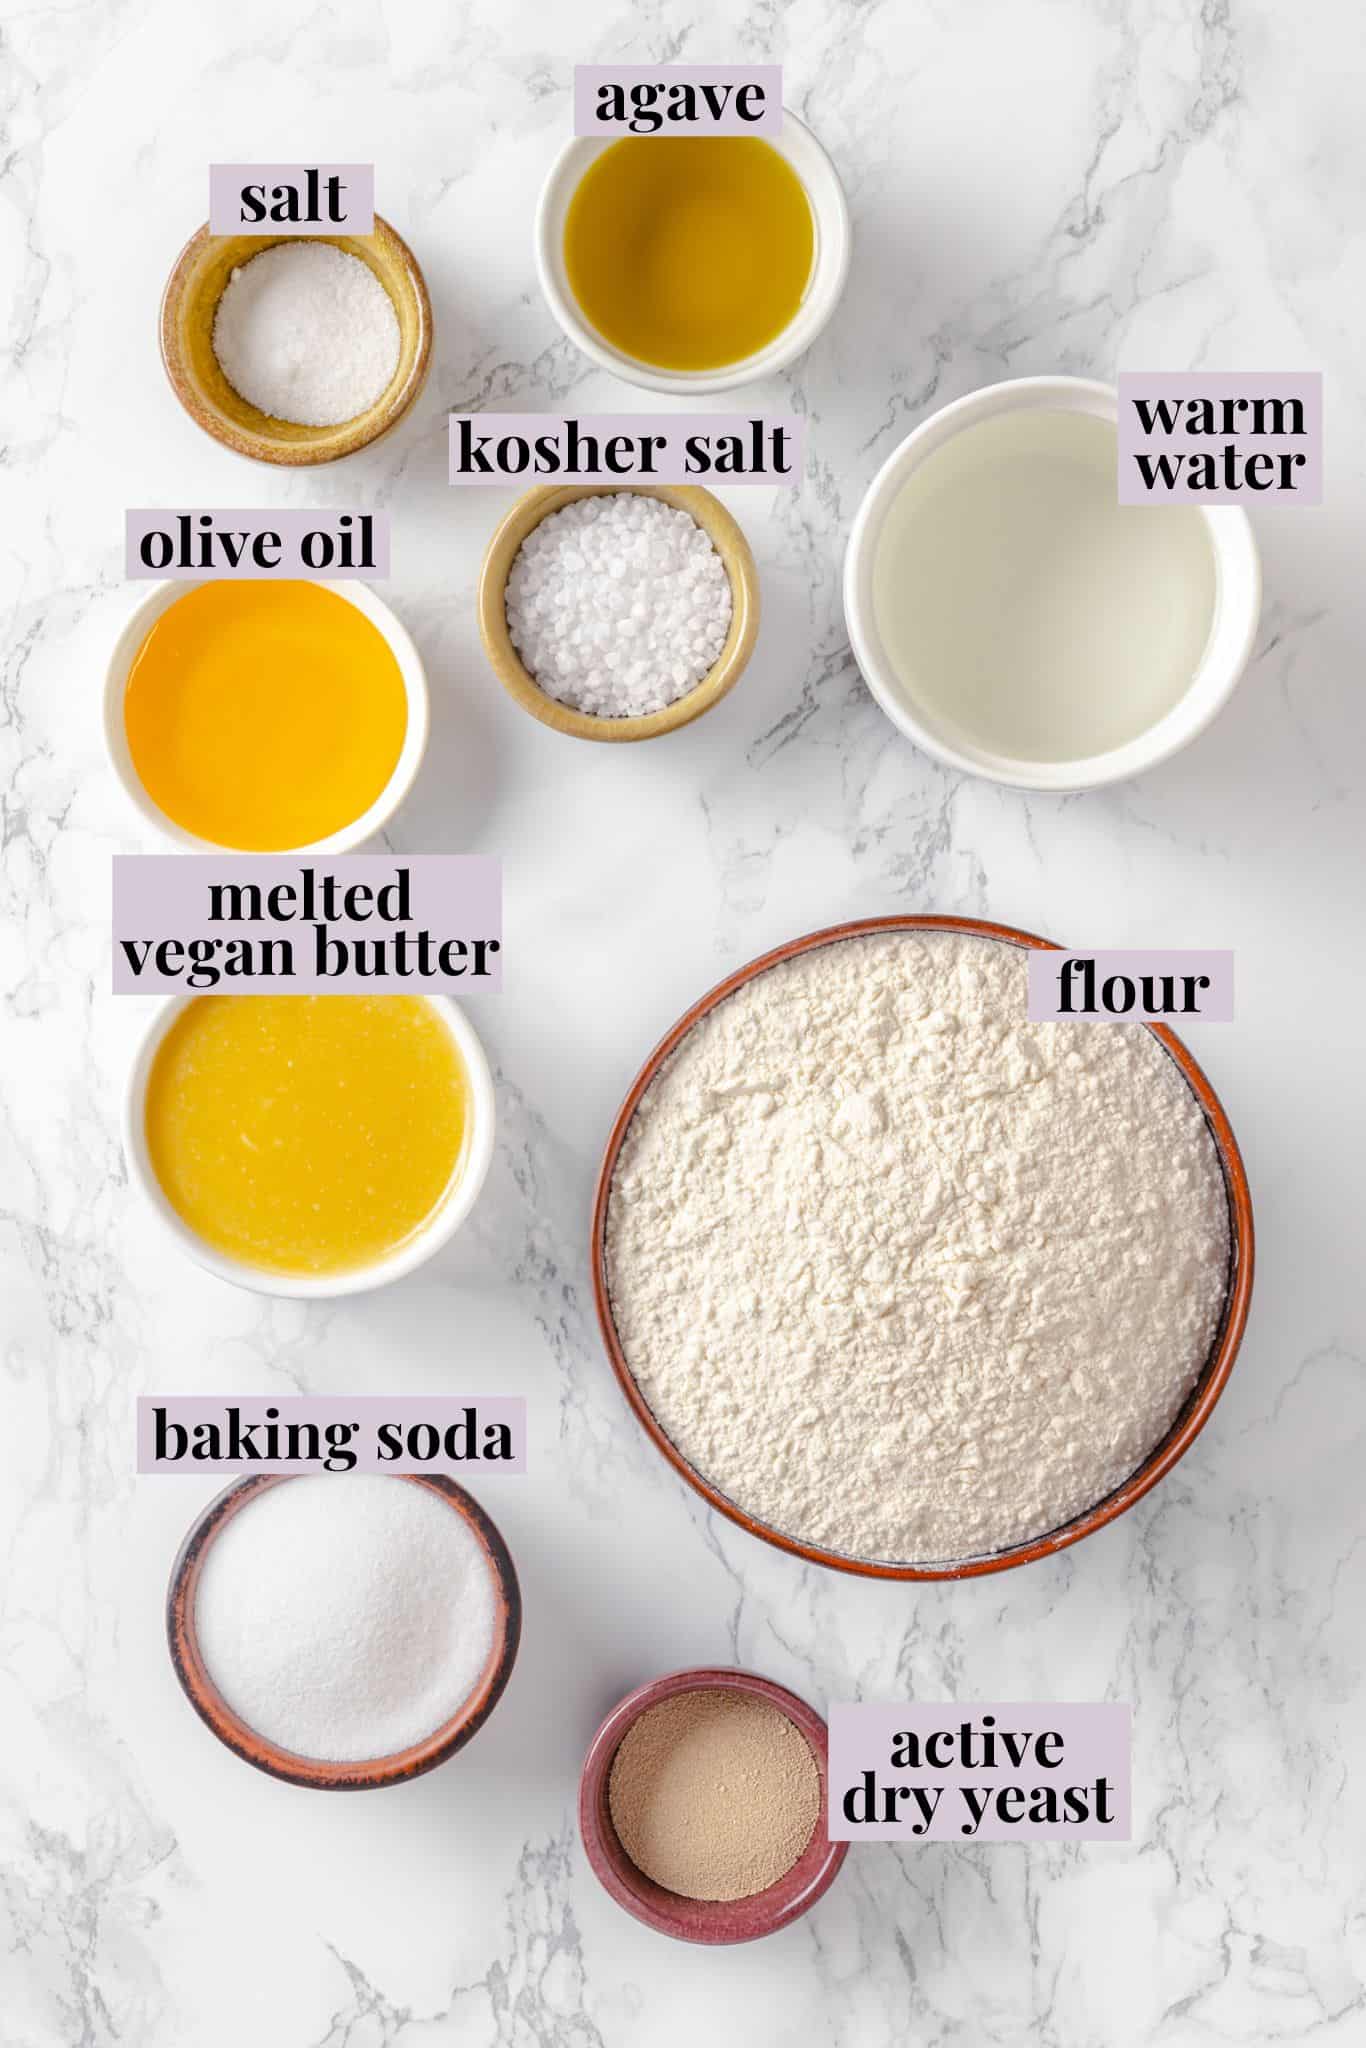 Overhead view of ingredients for soft pretzel recipe with labels